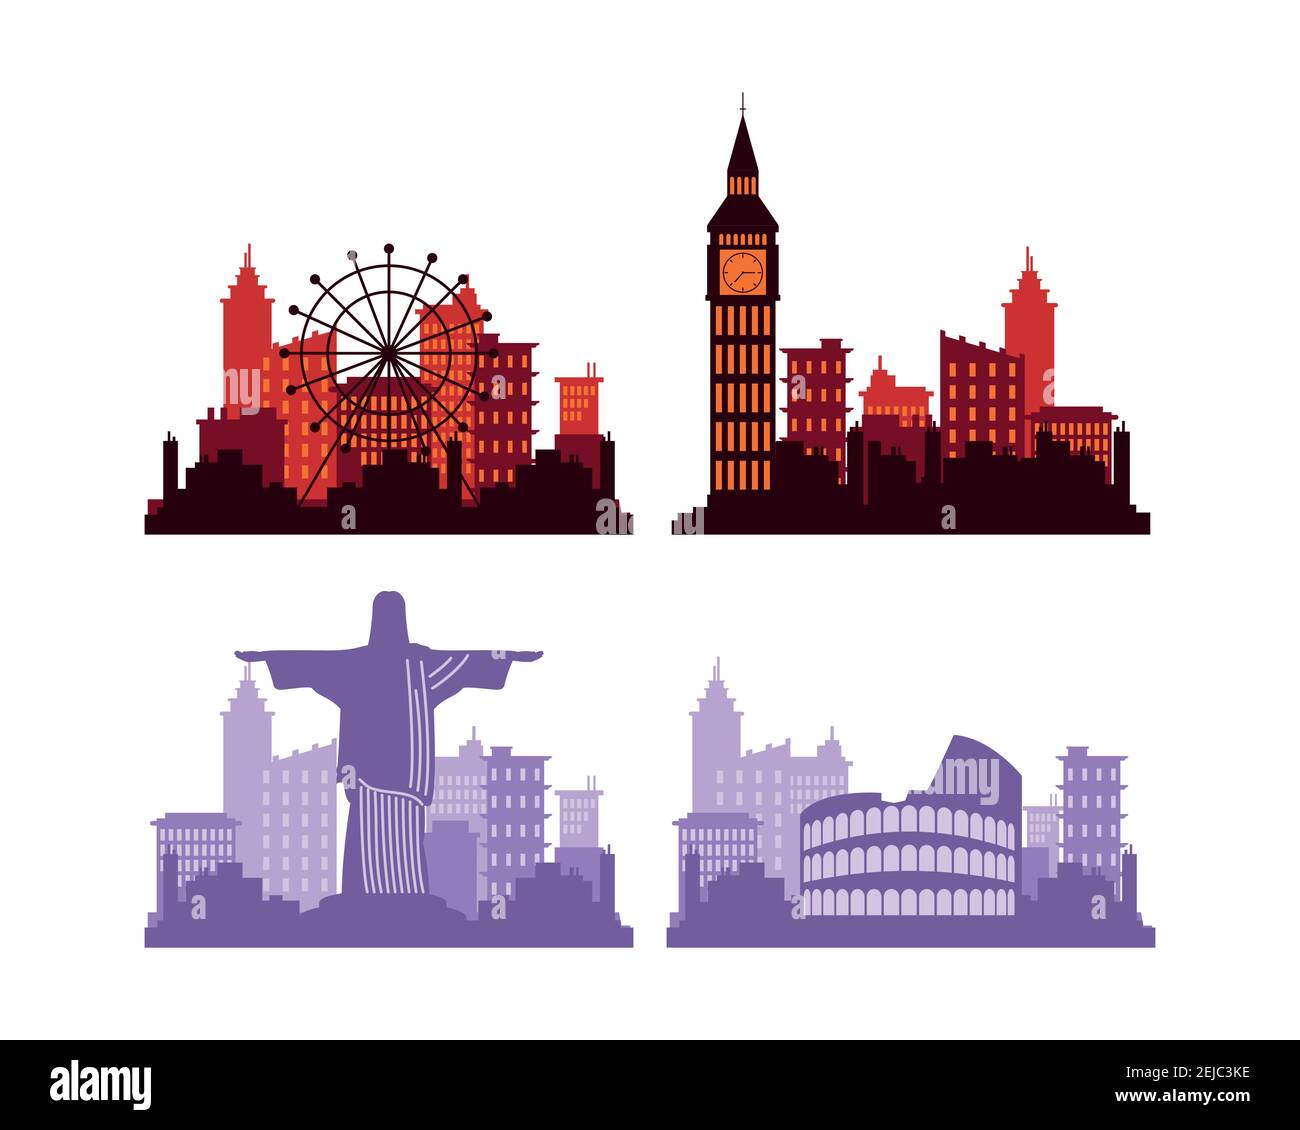 bundle of four cities silhouettes scenes vector illustration design Stock Vector